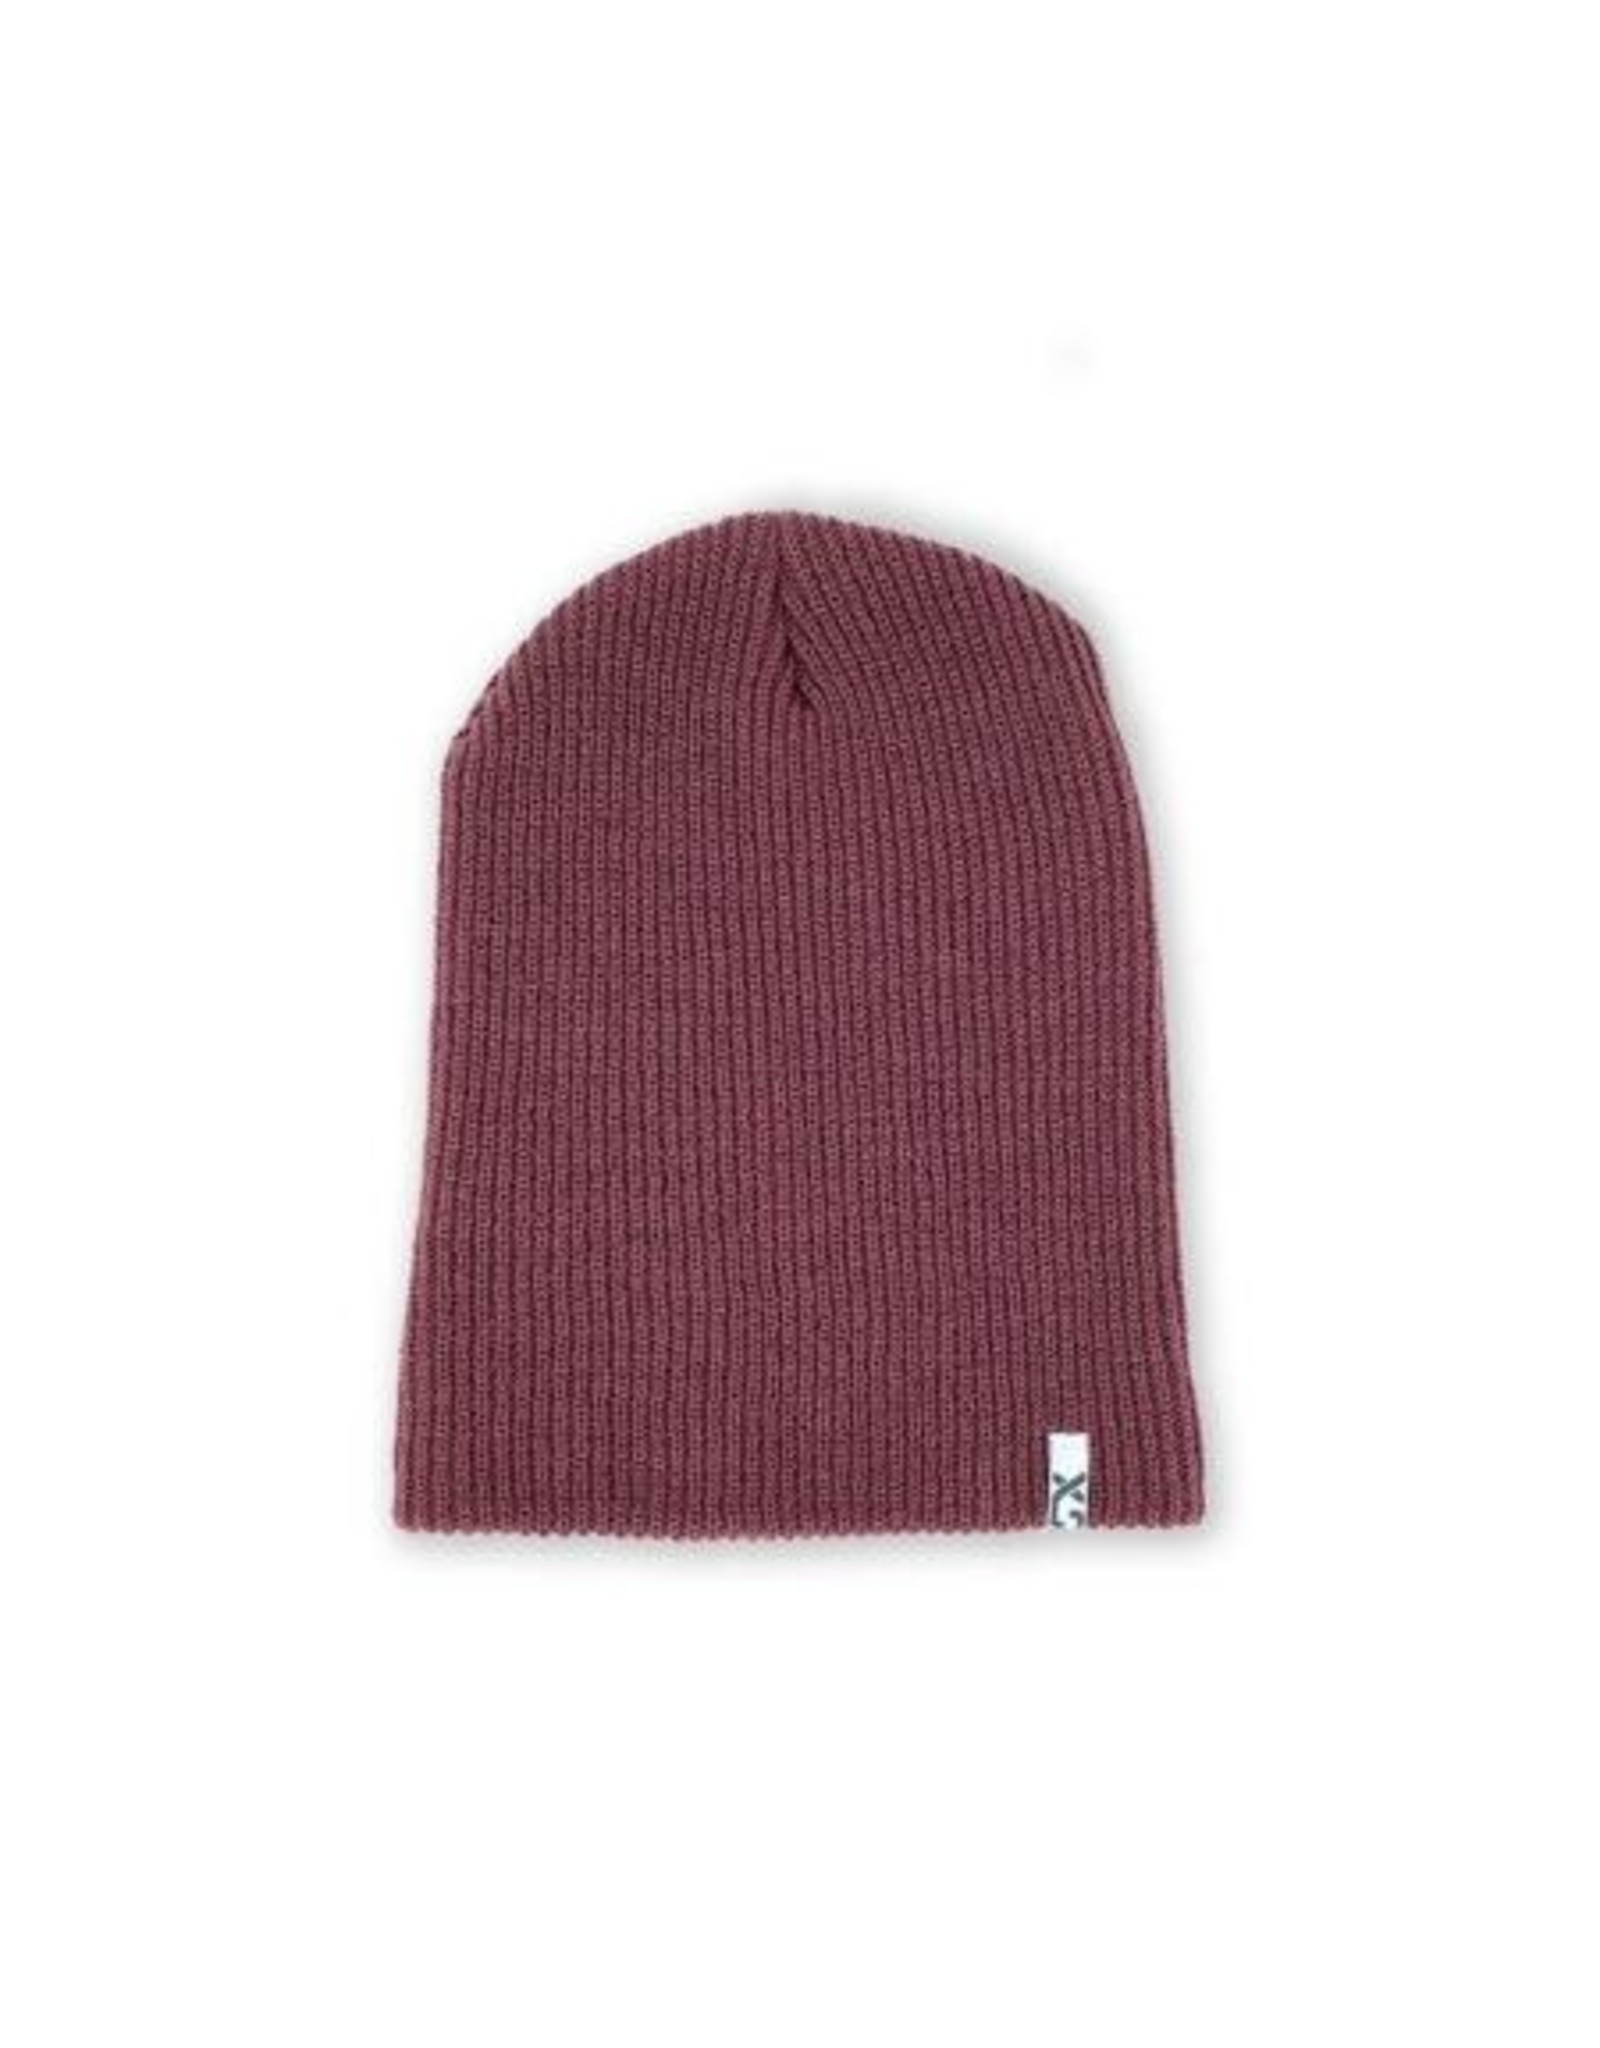 XS Unified - Classic Slouchy Beanie